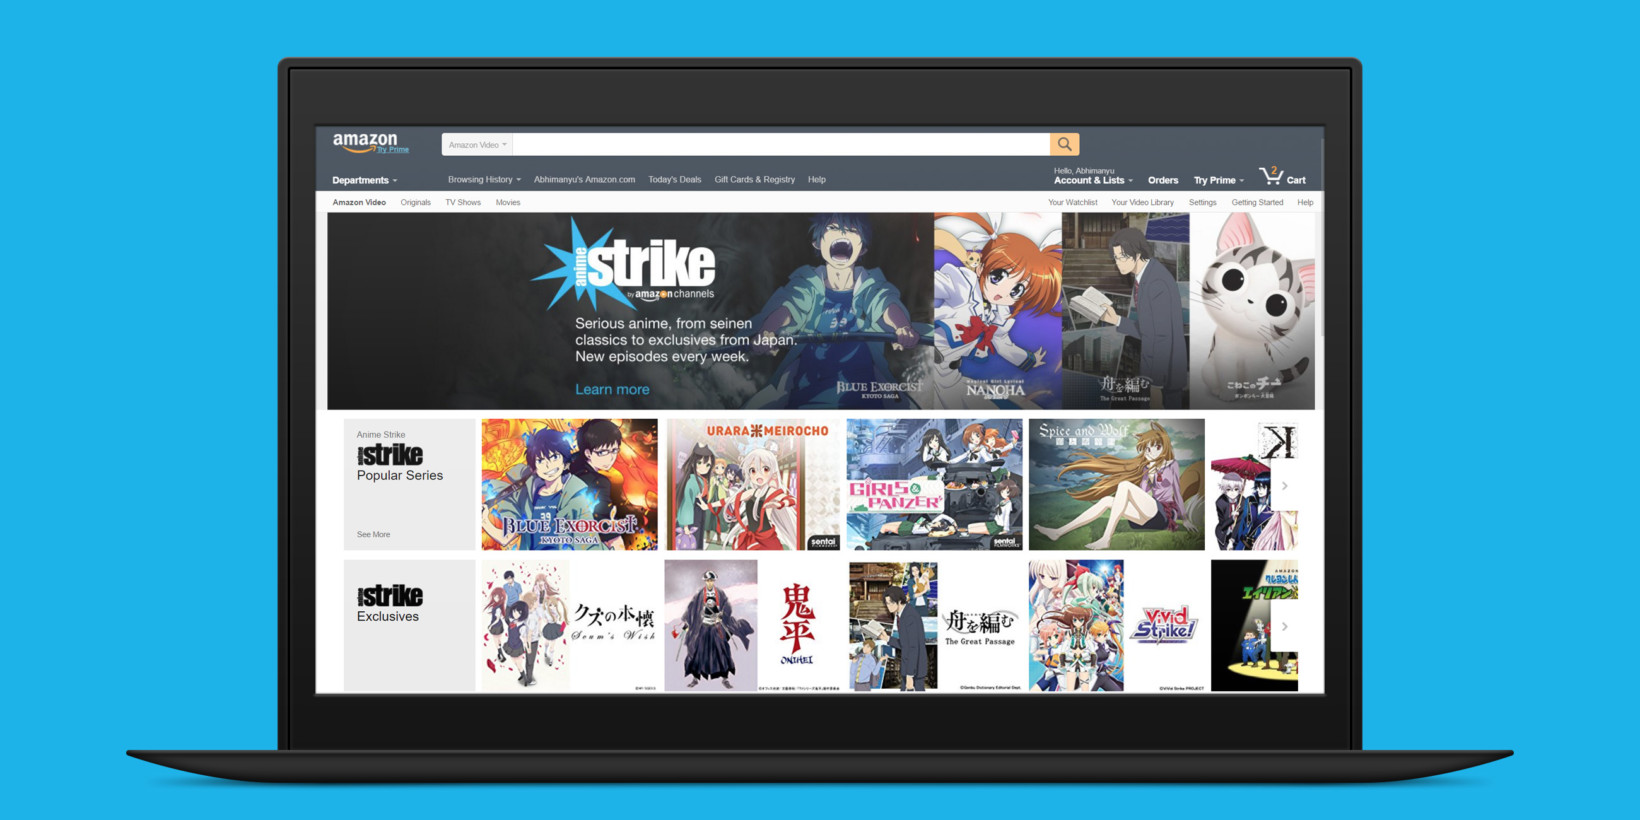 Is 9anime A Legal Anime Streaming Site?